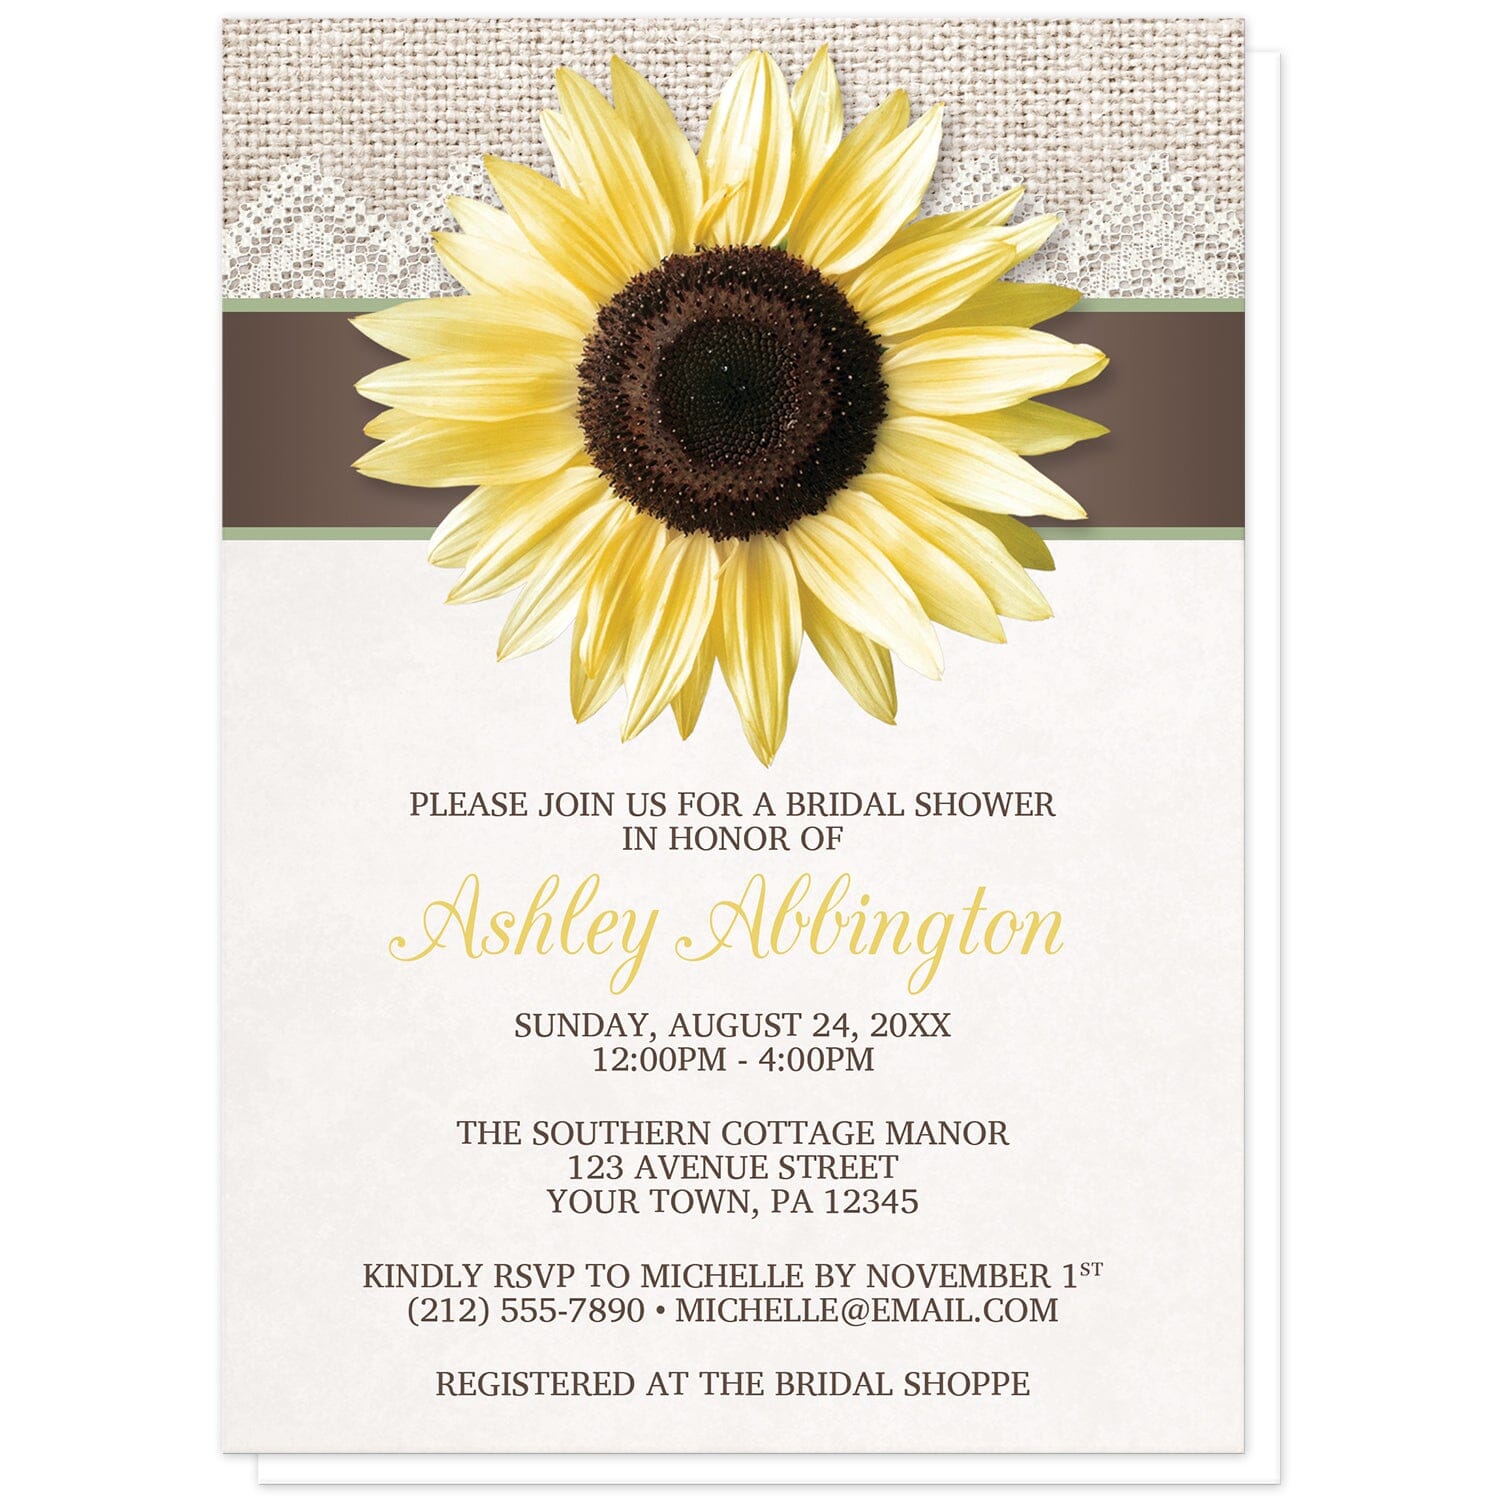 Burlap Lace Brown Sage Sunflower Bridal Shower Invitations at Artistically Invited. Burlap lace brown sage sunflower bridal shower invitations with a lovely big yellow sunflower on a brown ribbon stripe with sage green edges and a rustic burlap and lace background illustration along the top of the invitations. Your personalized bridal shower celebration details are custom printed in yellow and brown over a light beige background color below the sunflower design. 